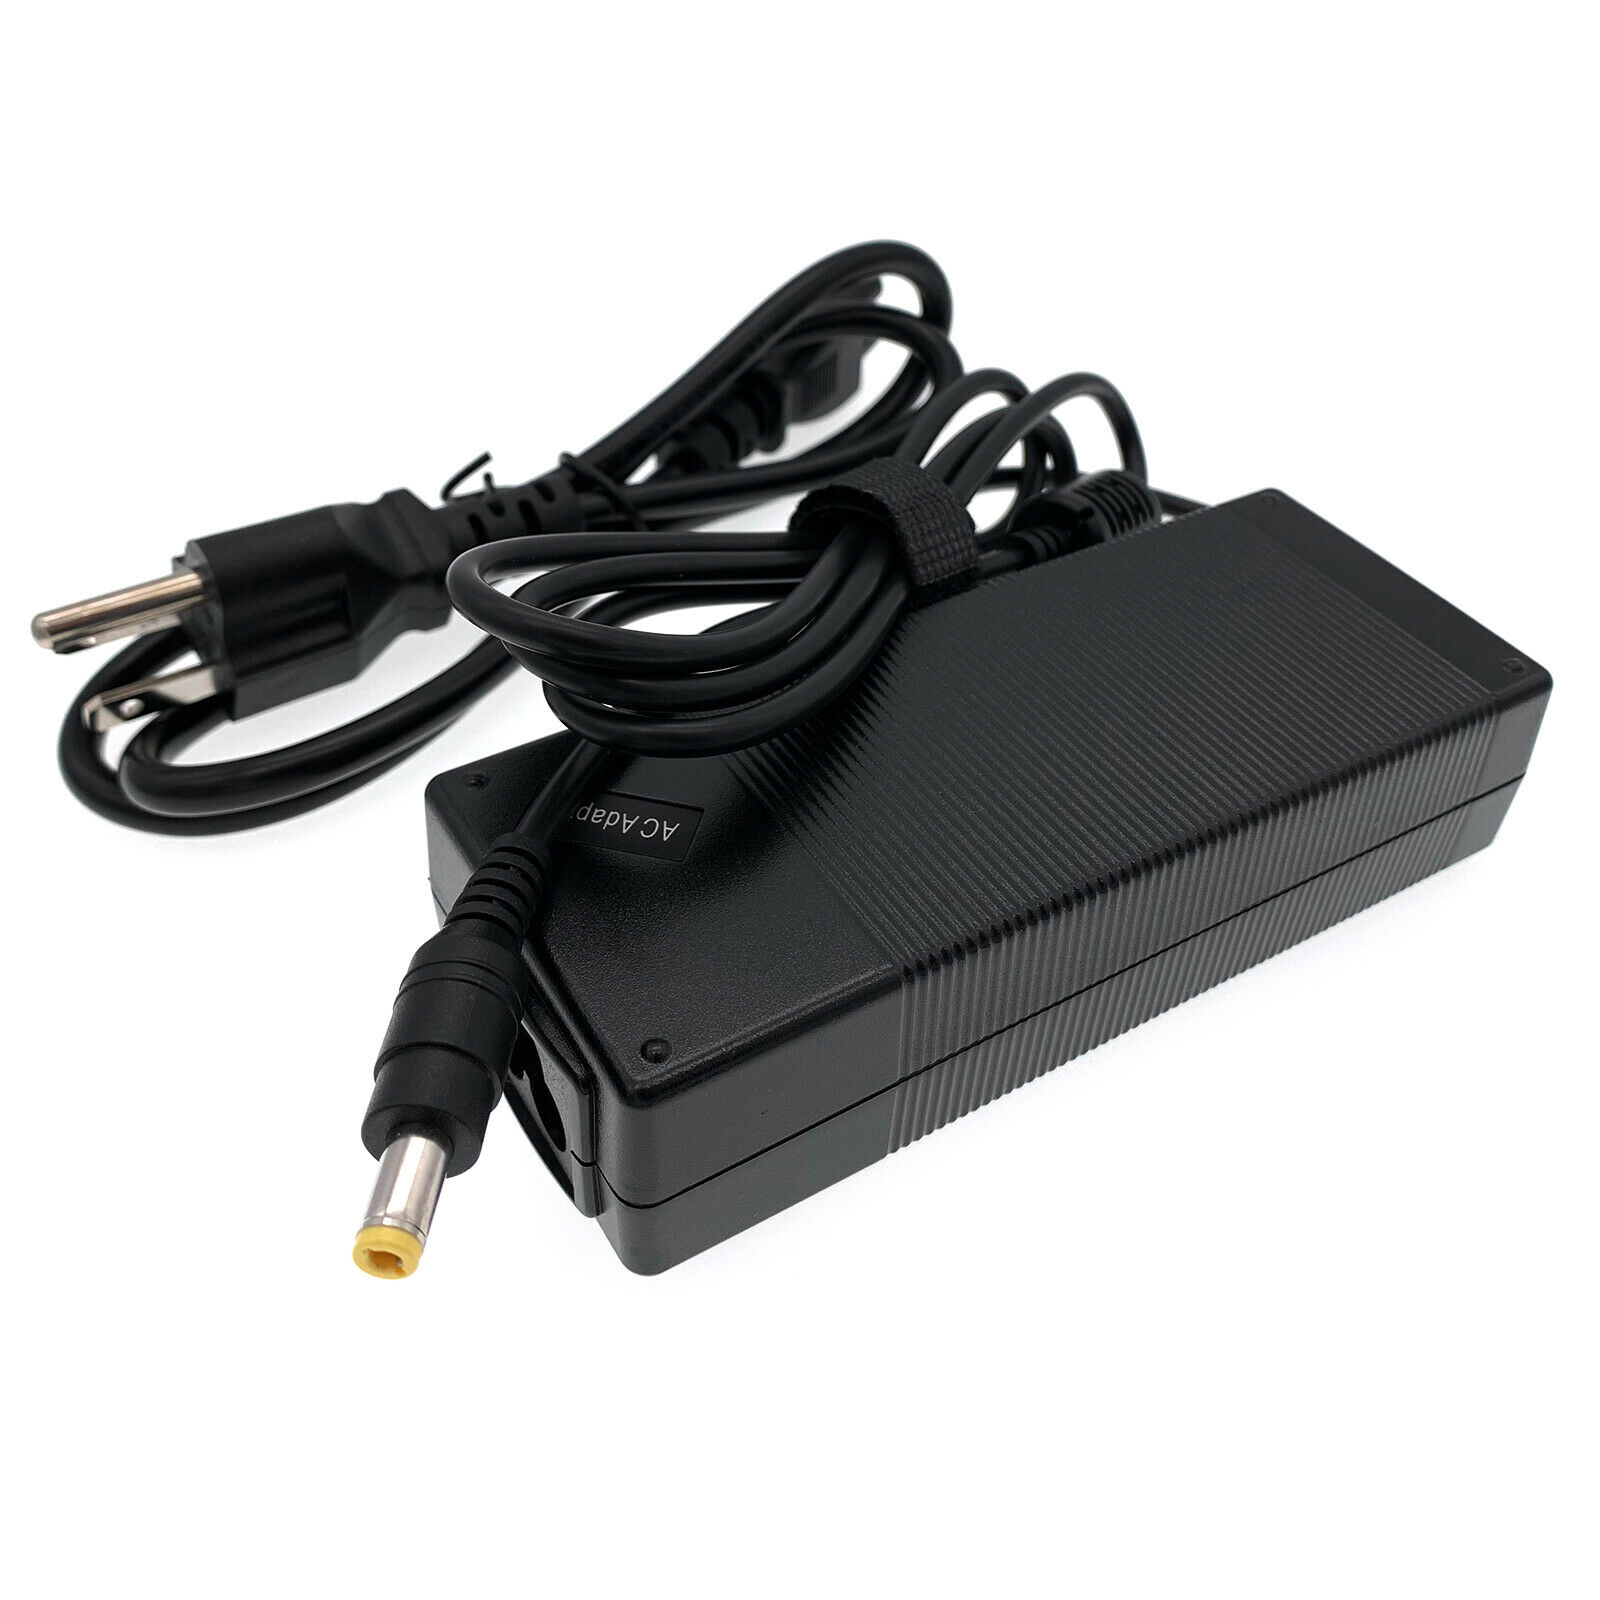 AC Adapter Charger For Panasonic Toughbook CF-19 CF-31 CF-52 CF-53 Power & Cord - image 5 of 6